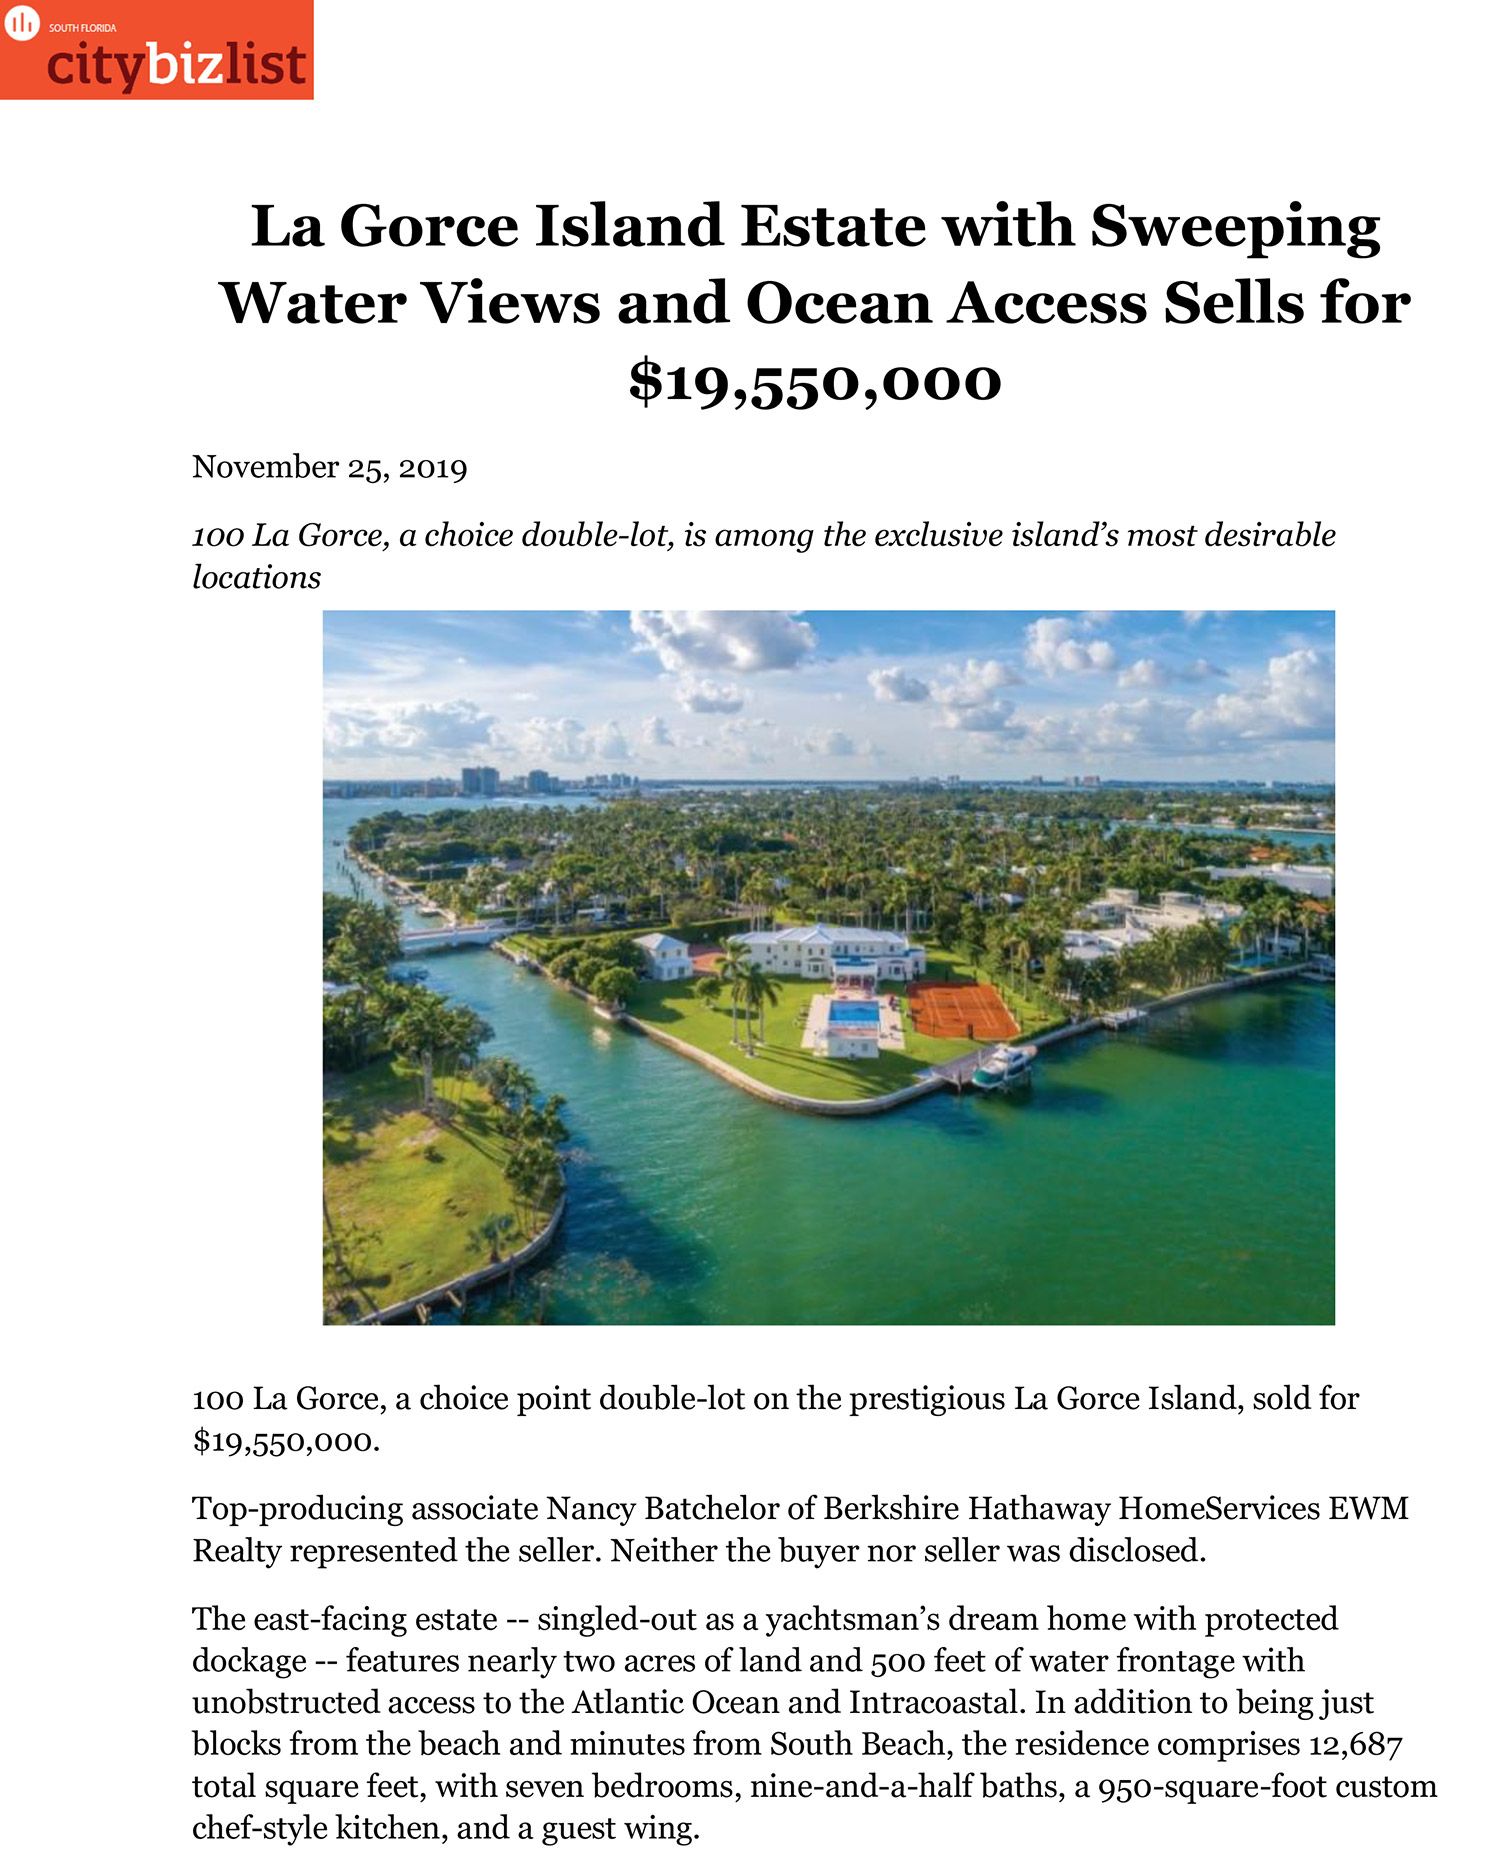 La Gorce Island Estate with Sweeping Water Views and Ocean Access Sells for $19,550,000